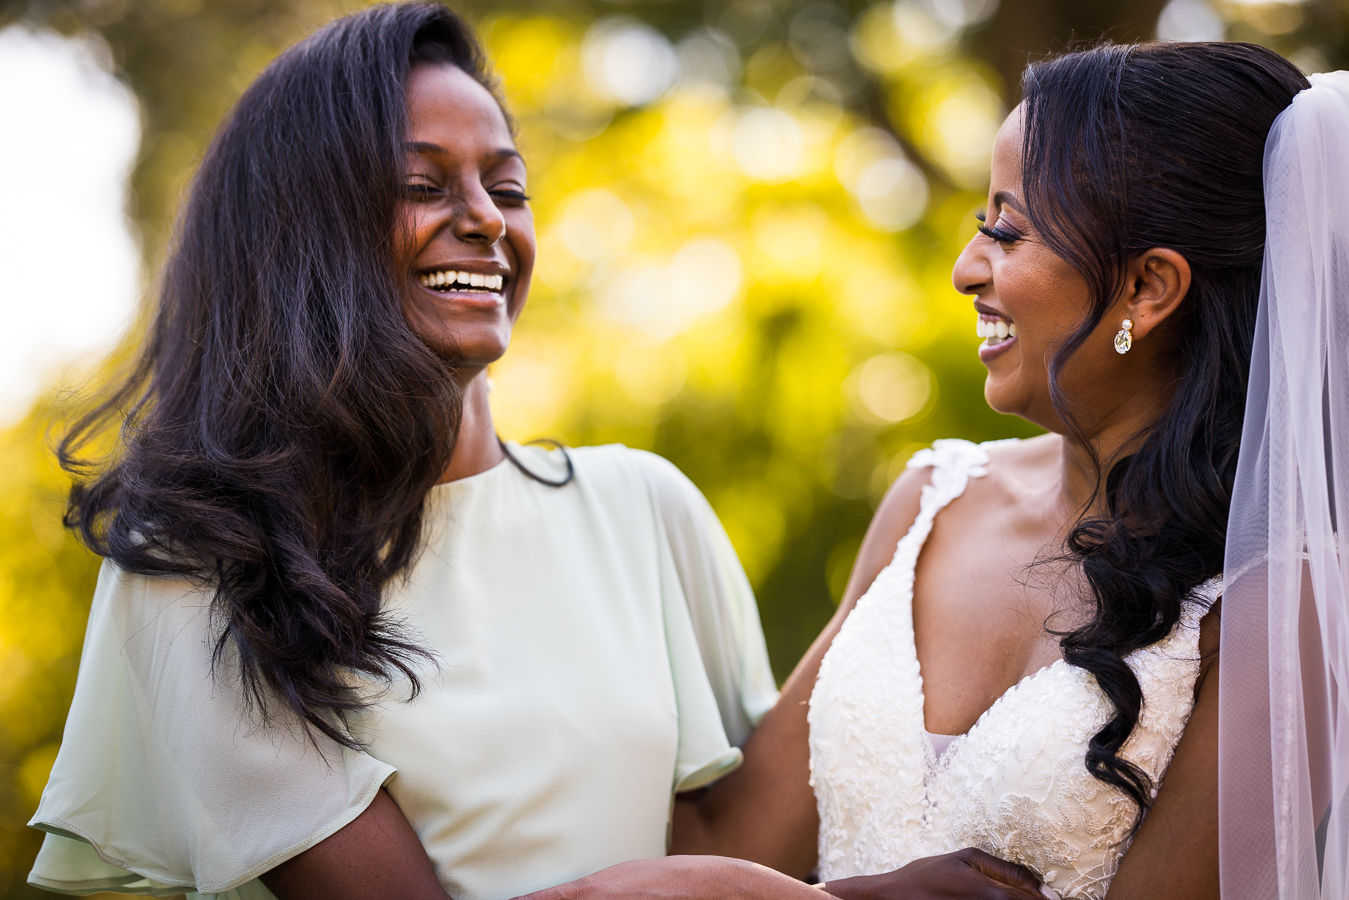 candid dc wedding photographer, Lisa Rhinehart, captures this candid moment between the bride and her bridesmaid as they laugh together outside of st francis hall 